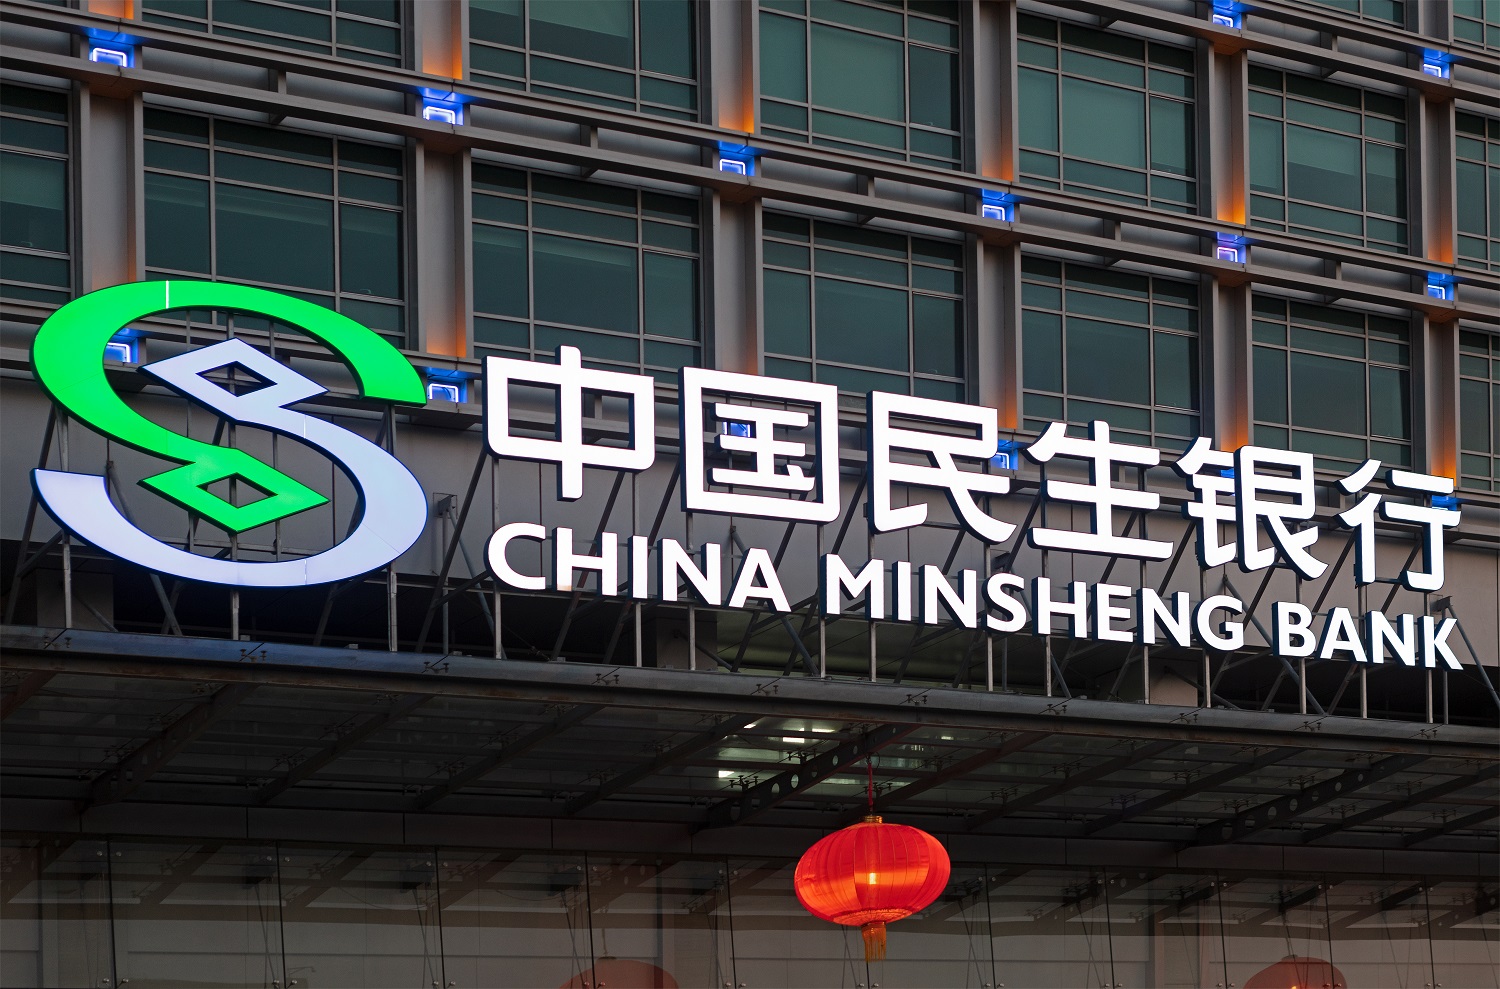 A sign that reads “China Minsheng Bank” on the side of a building in Beijing, the capital of China.